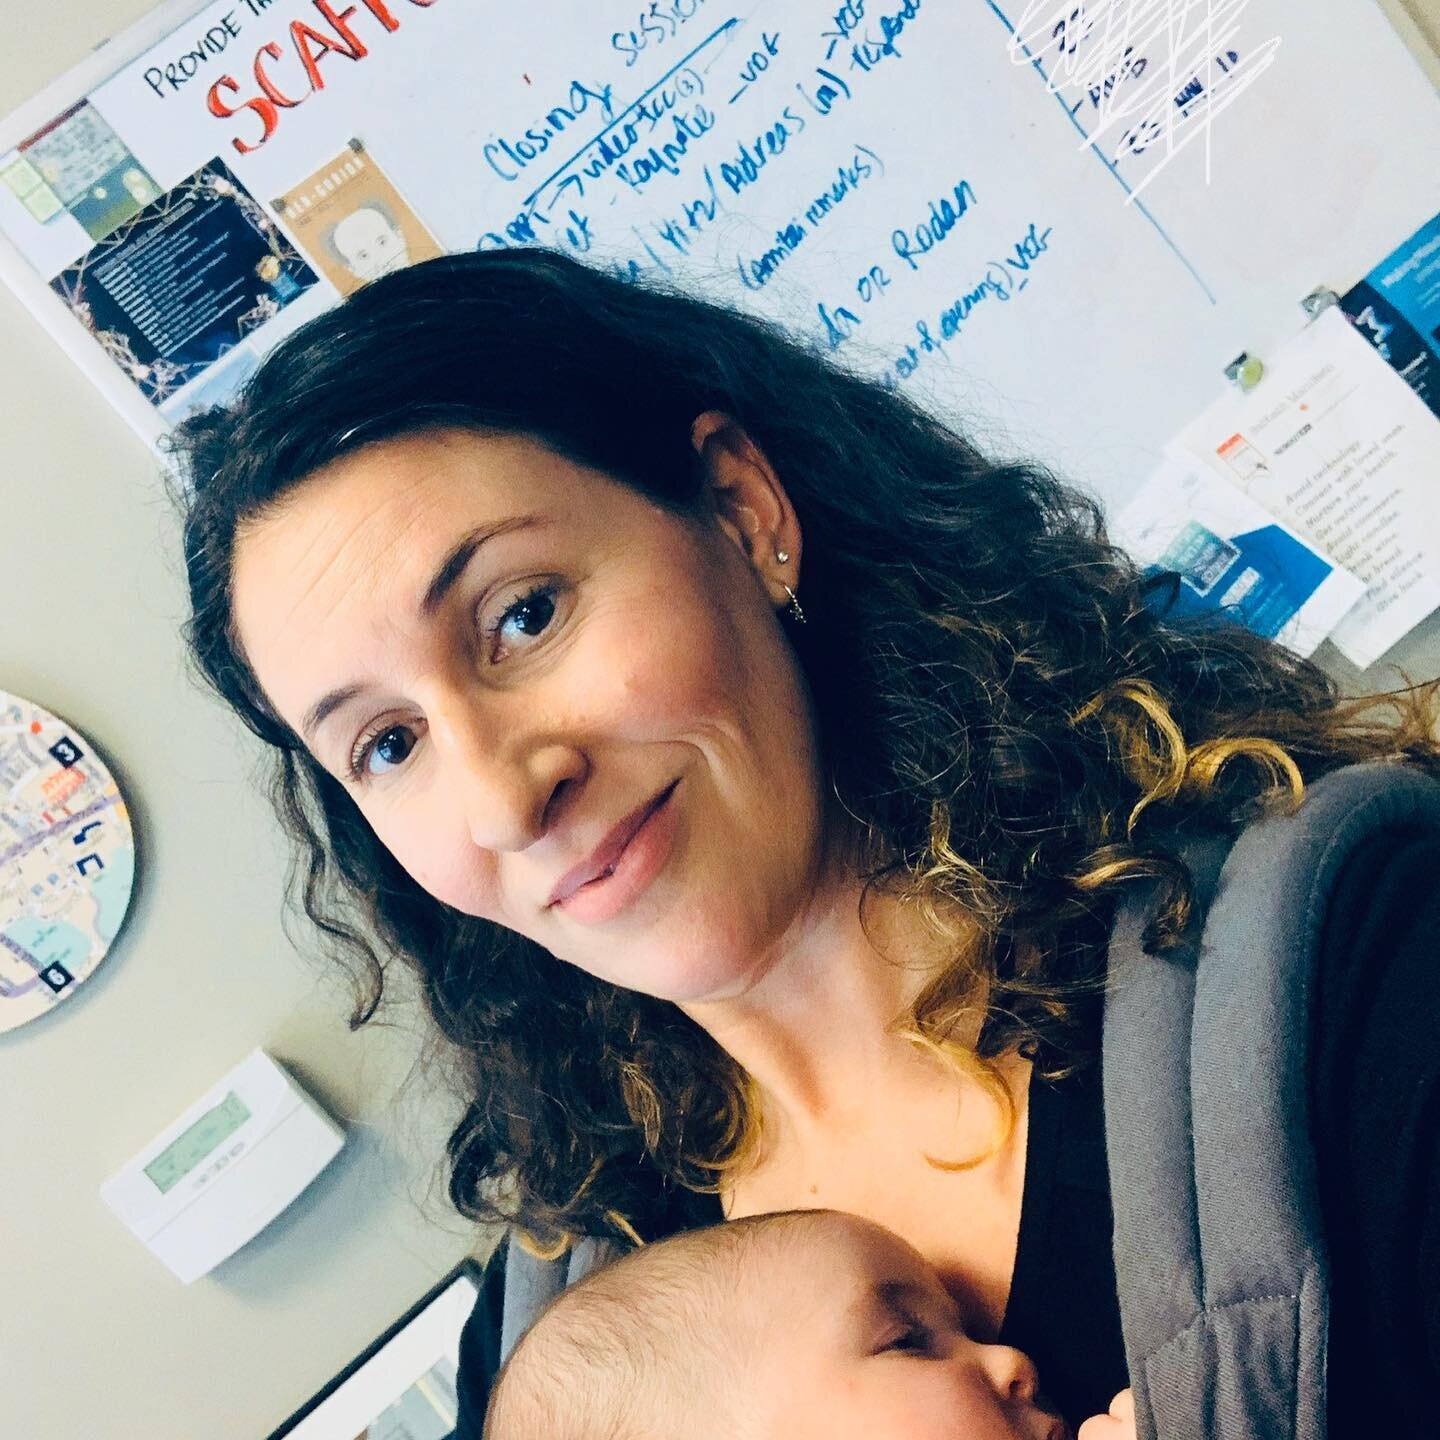 @makeasceneevents back at those client meetings...with the bebe. .
.
.
#MakeAScene #WorkinMama #TheShowMustGoOn #BabyMeetings #Miracles #PaloAlto #BenGurion